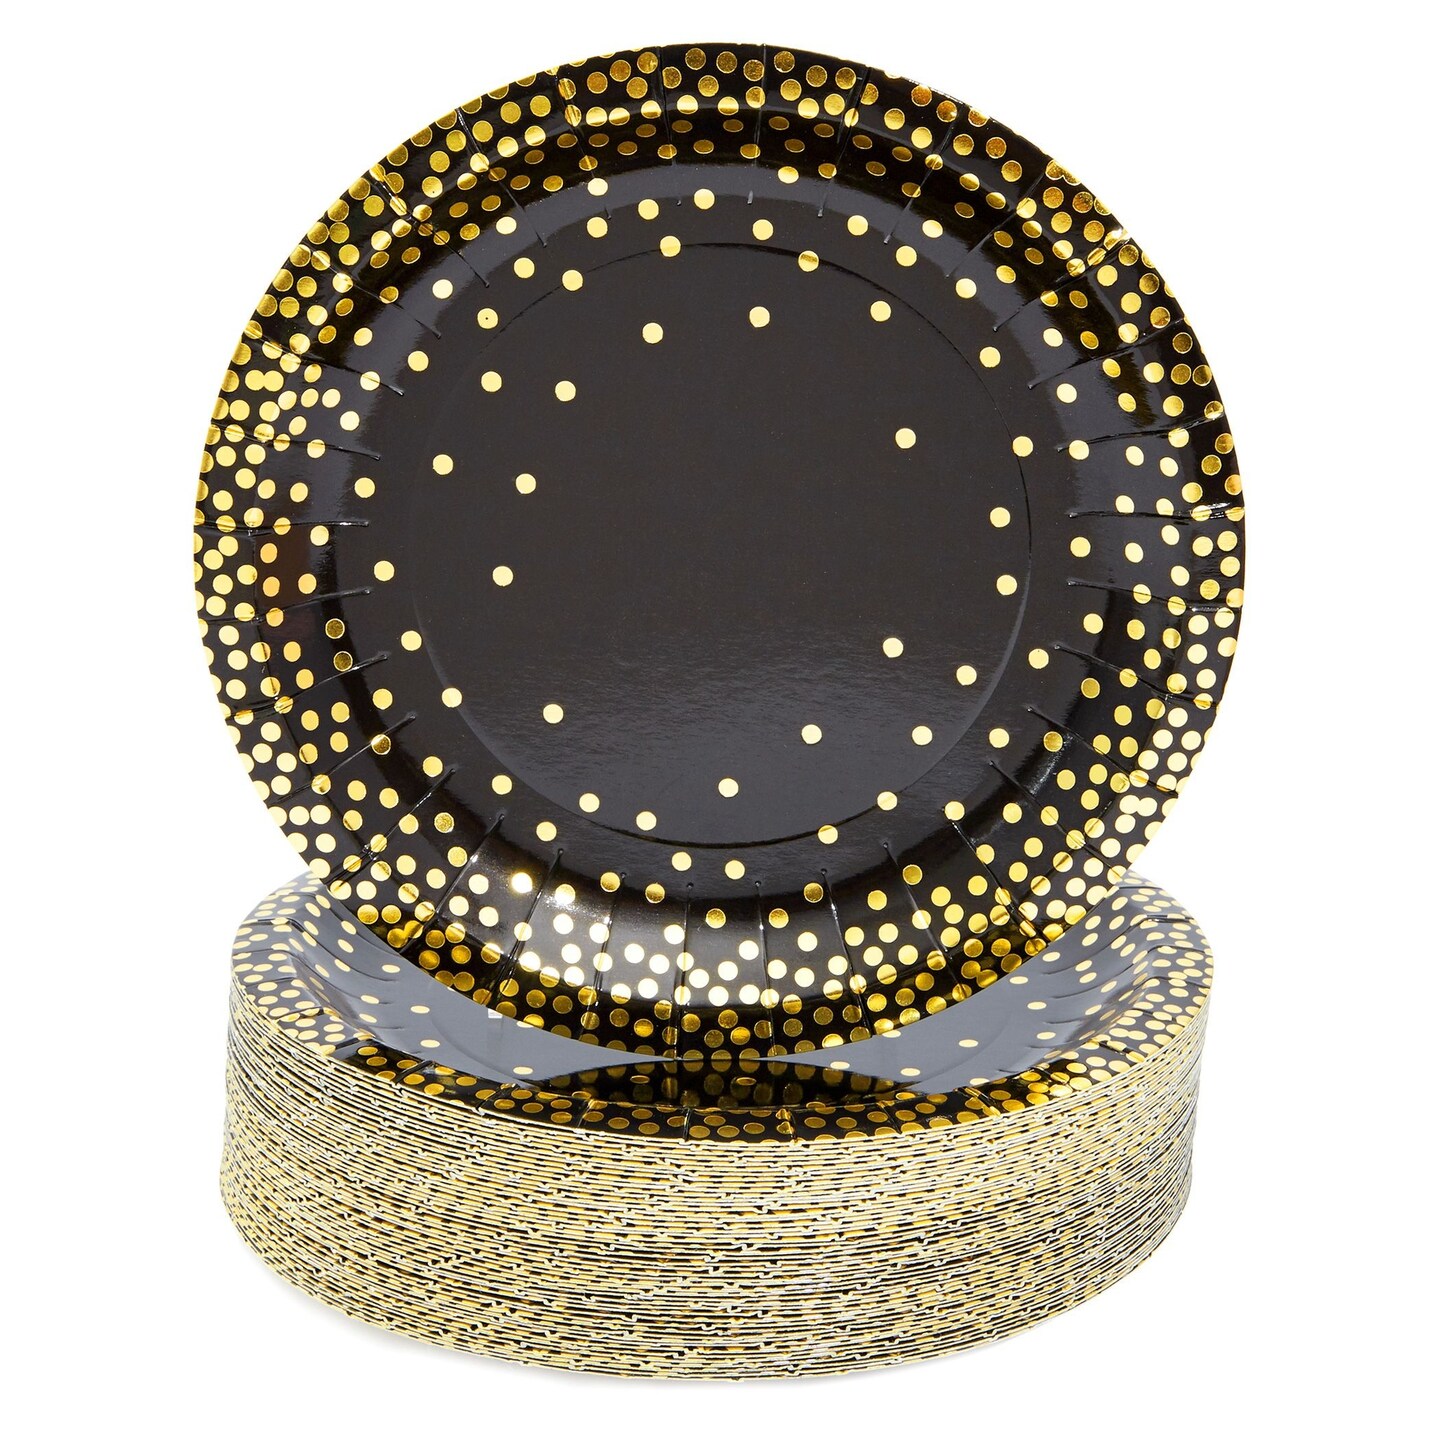 48-Pack Black and Gold Party Plates, 7 Inch Paper Plates for Birthday Cake and Desserts